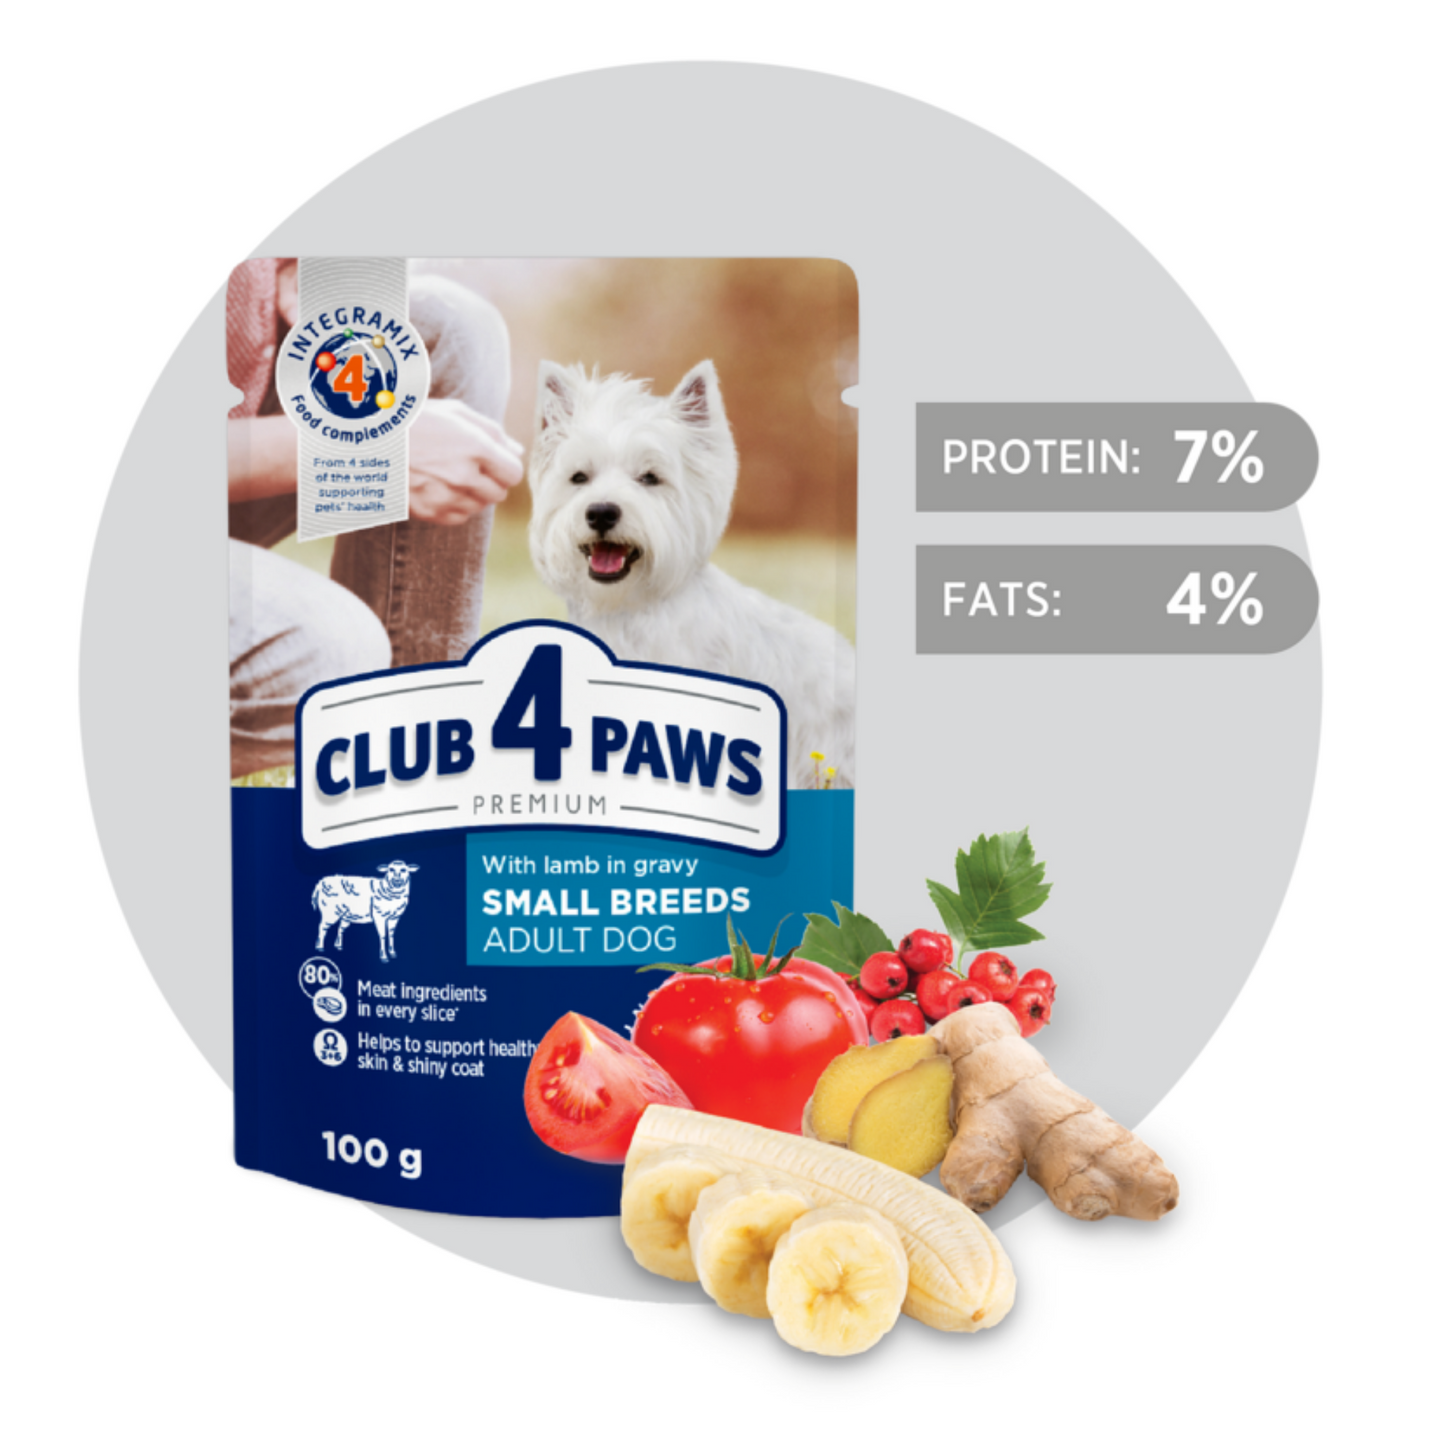 CLUB 4 PAWS Premium for Adult Small Dogs, with Lamb in Gravy